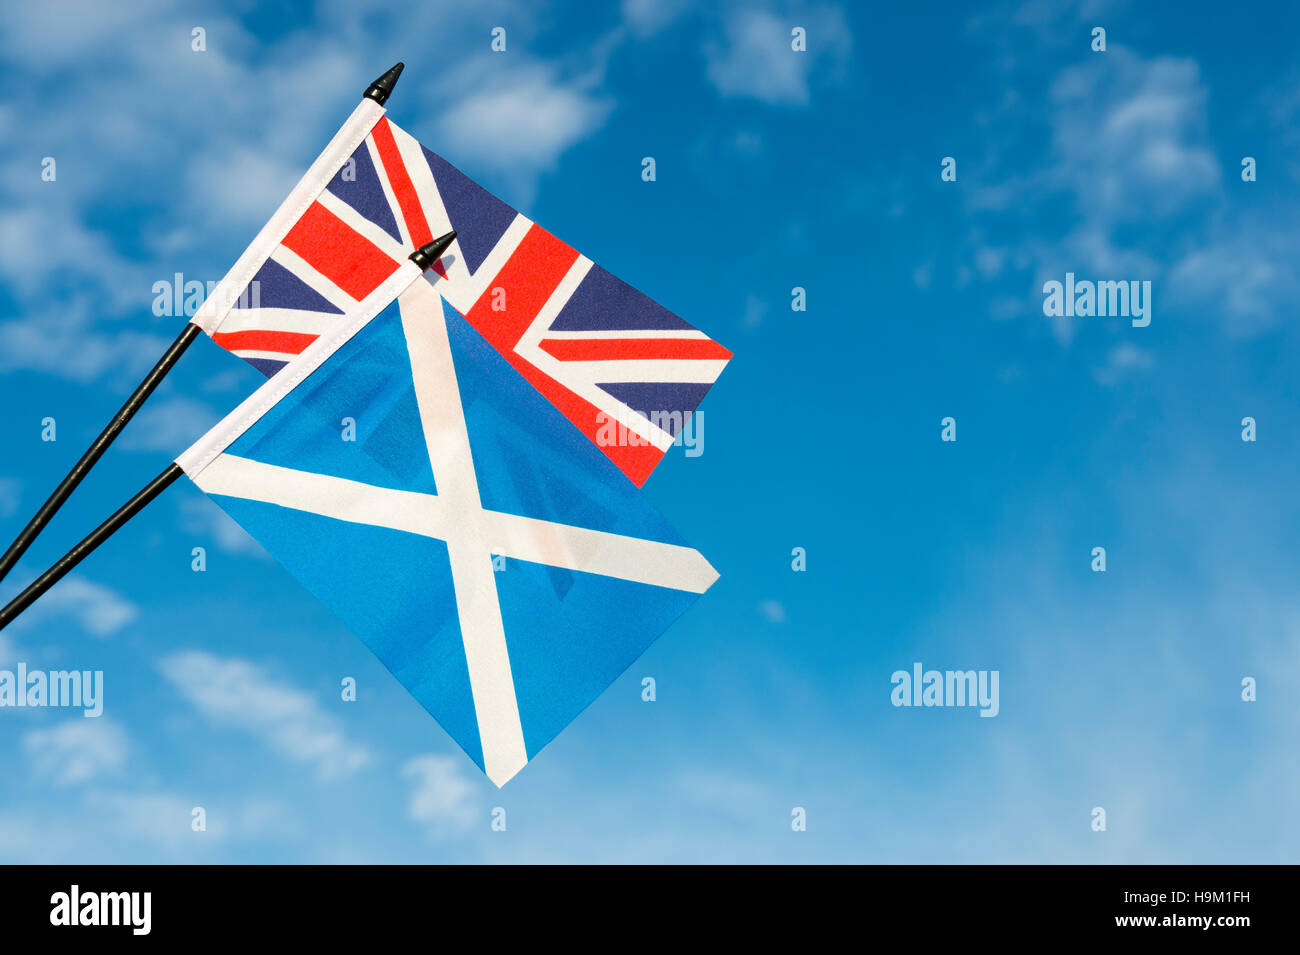 Scottish and UK Union Jack flags flying together in bright blue sky Stock Photo